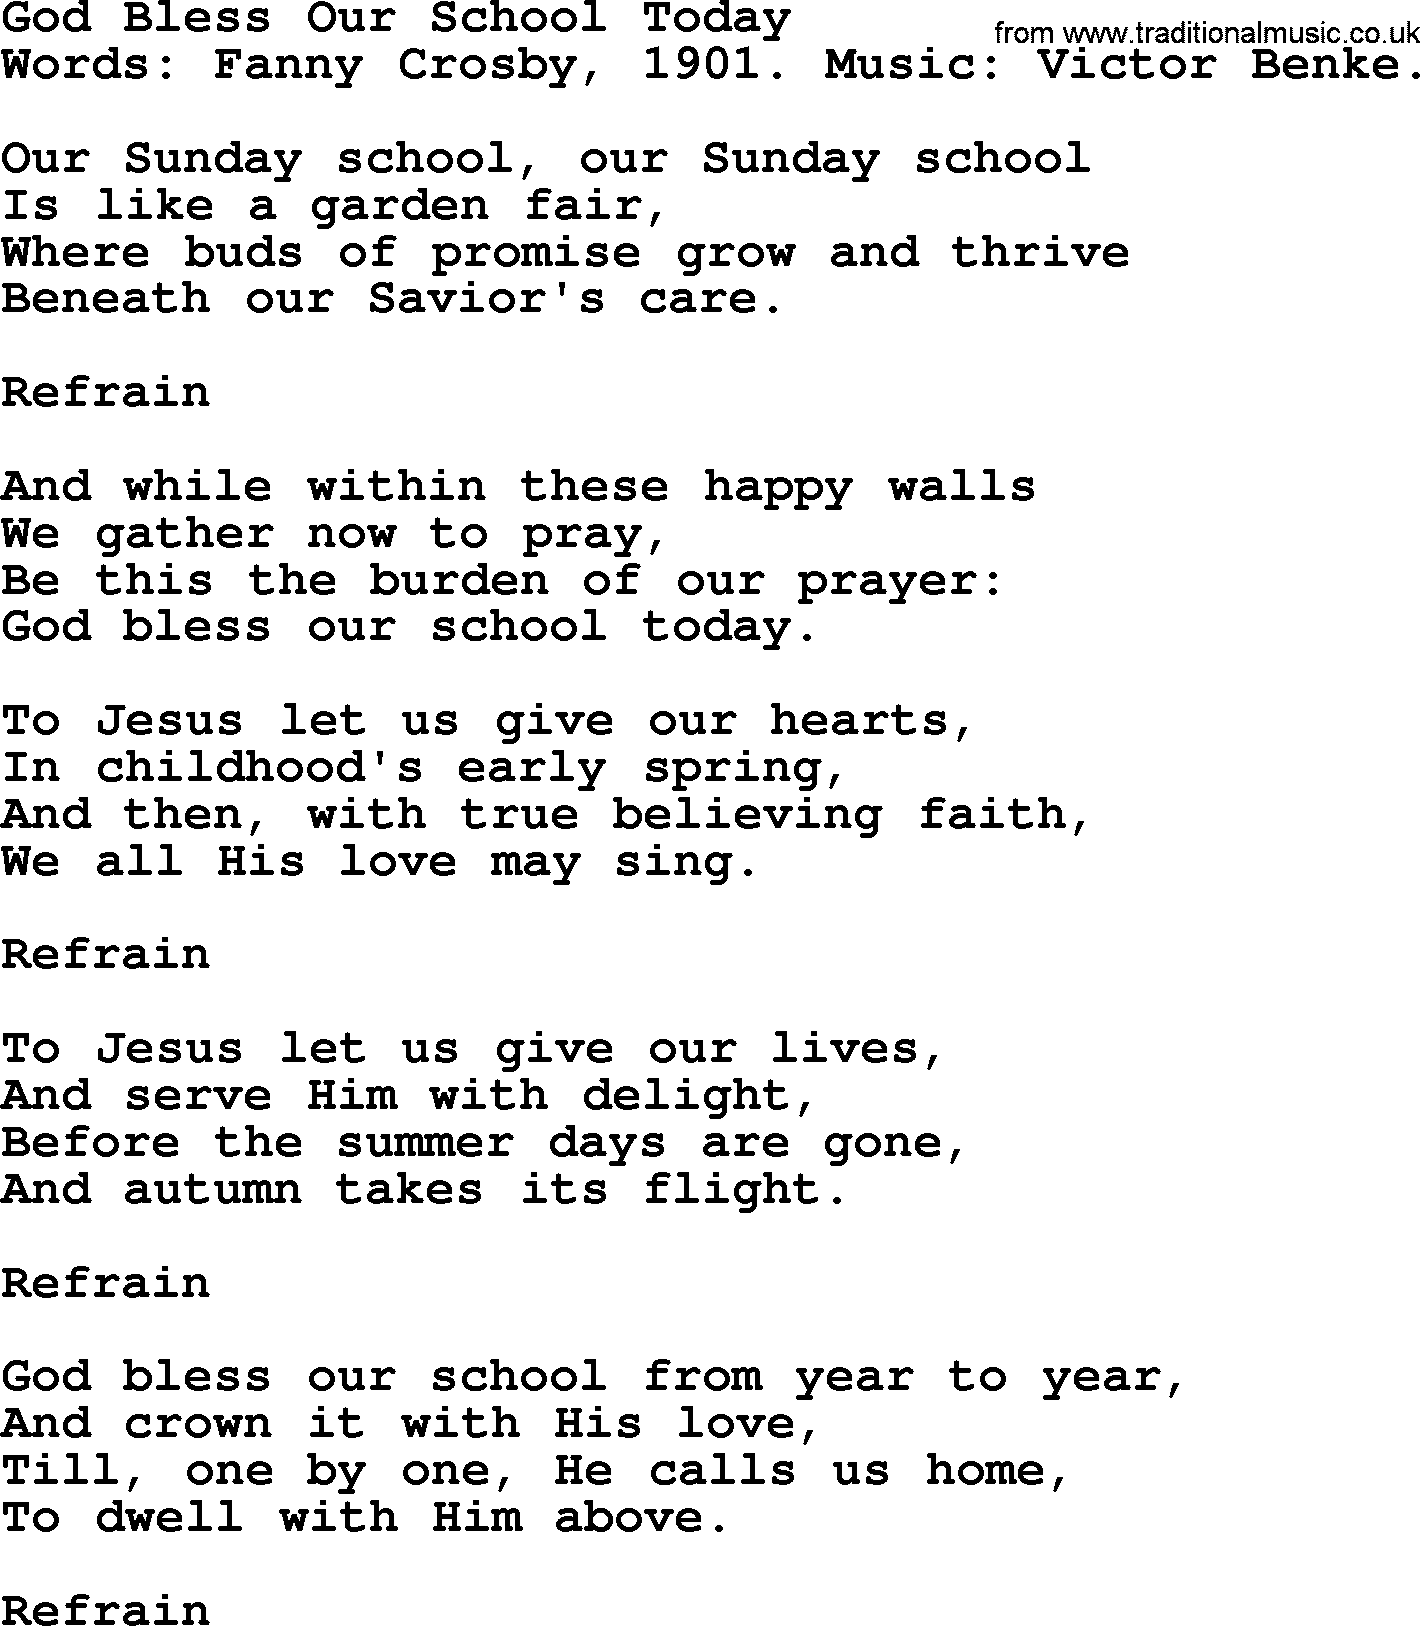 Fanny Crosby song: God Bless Our School Today, lyrics